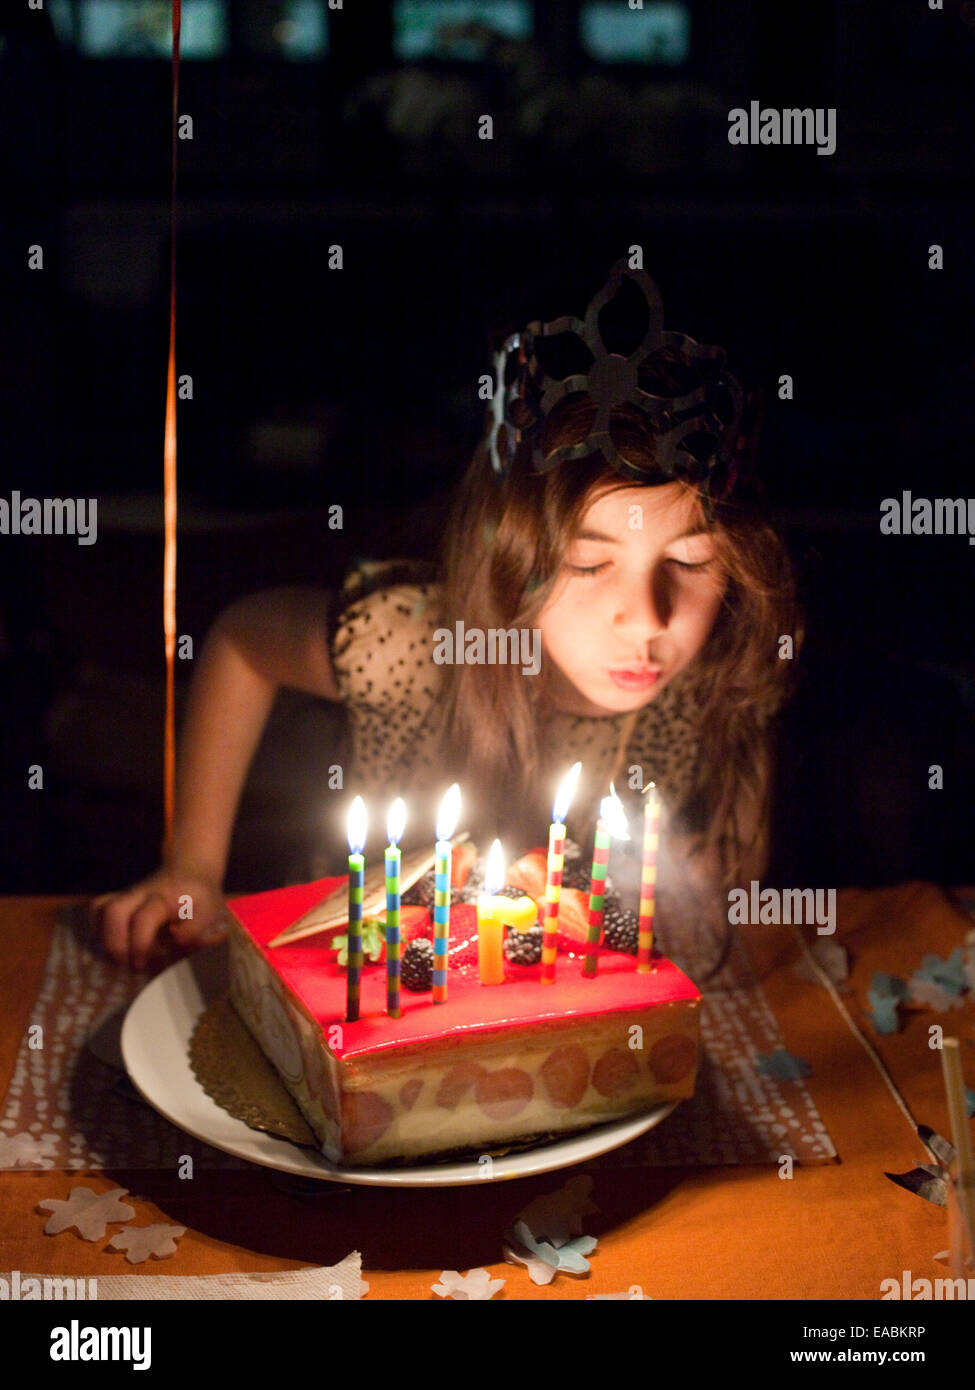 young girl blowing out the candles on her birthday cake Stock Photo